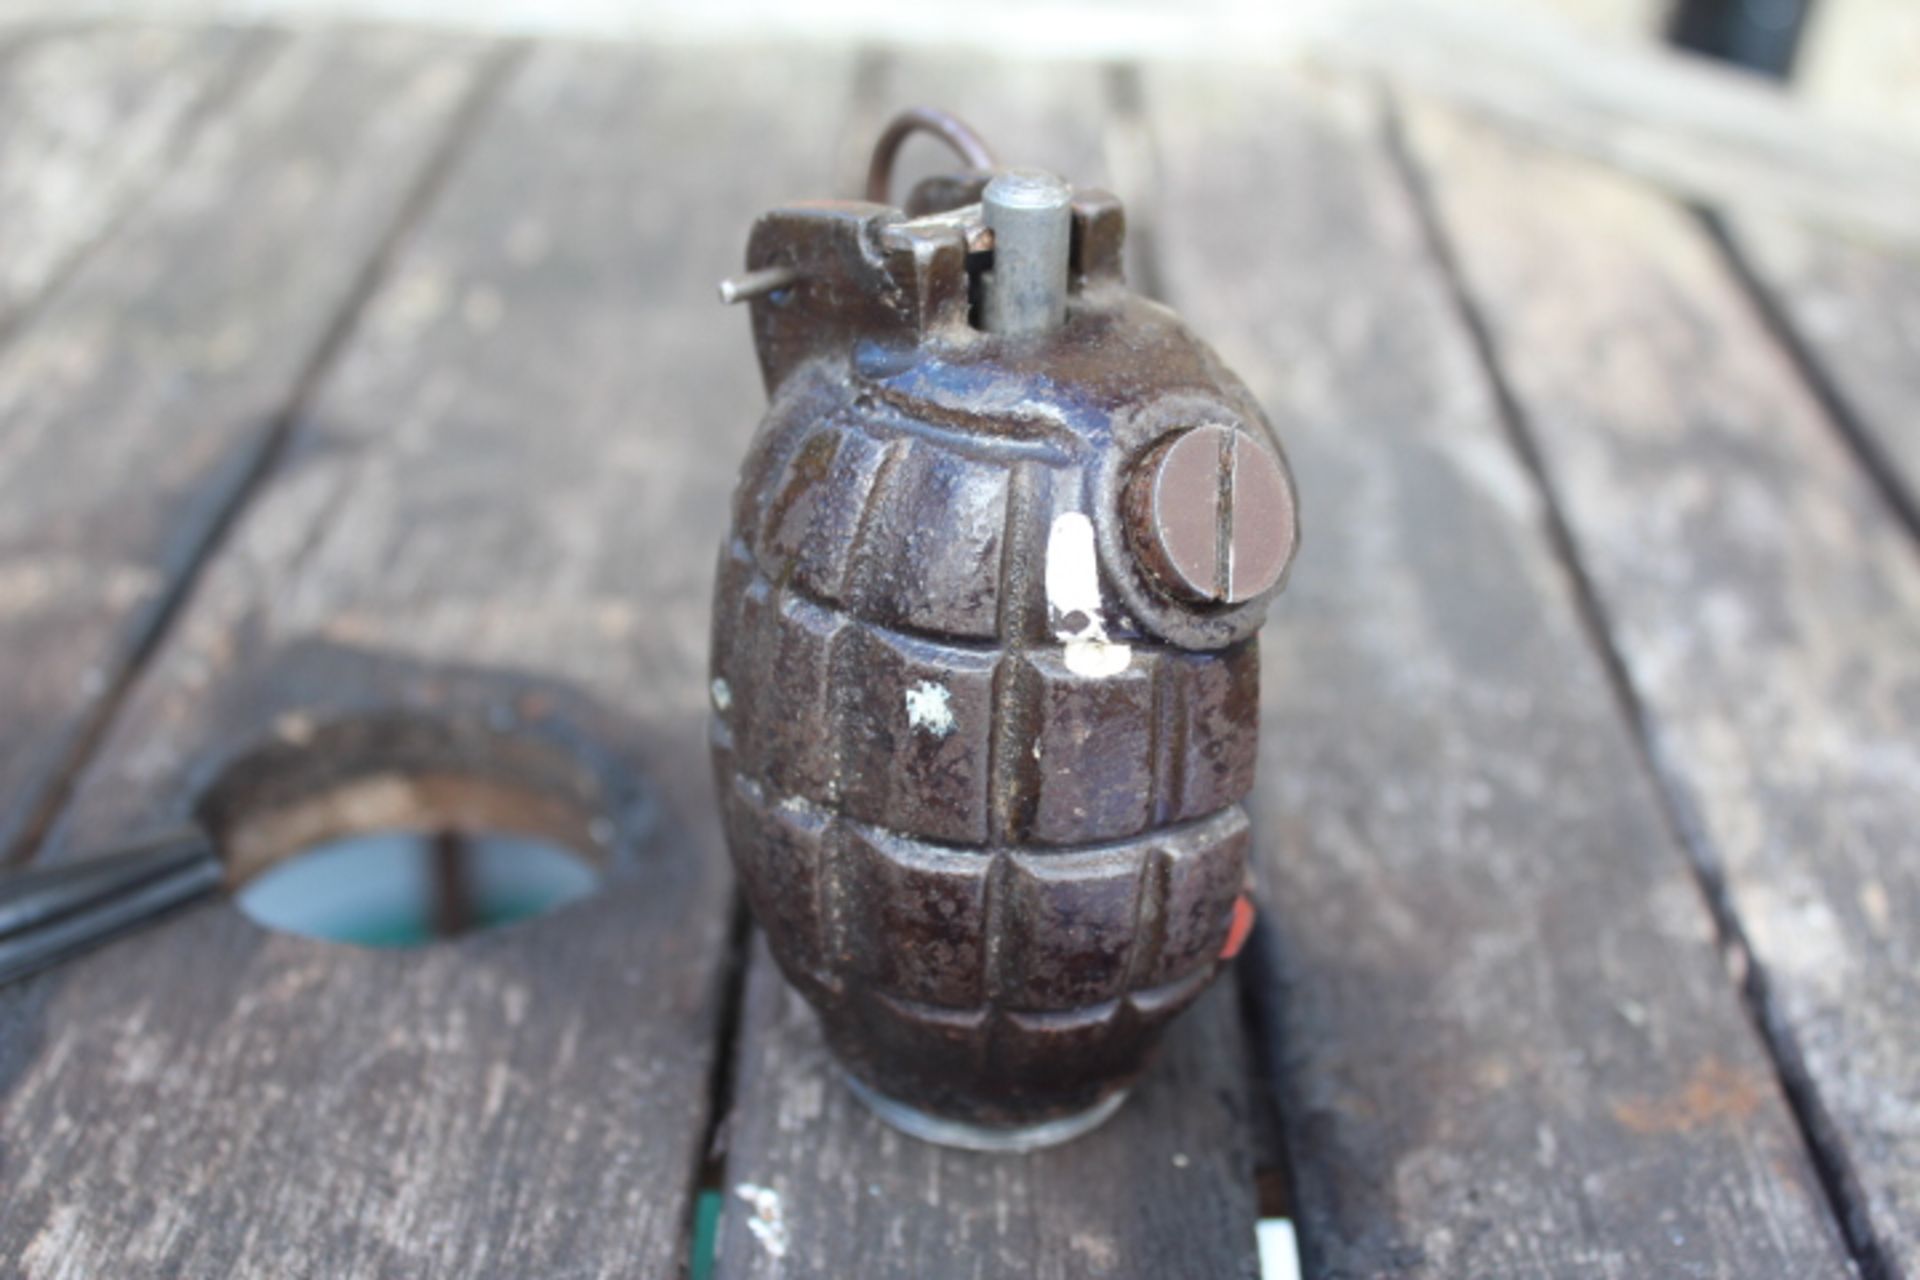 British WW1/WW2 practice grenade. The 26 Mills was used for many years. These were used to show